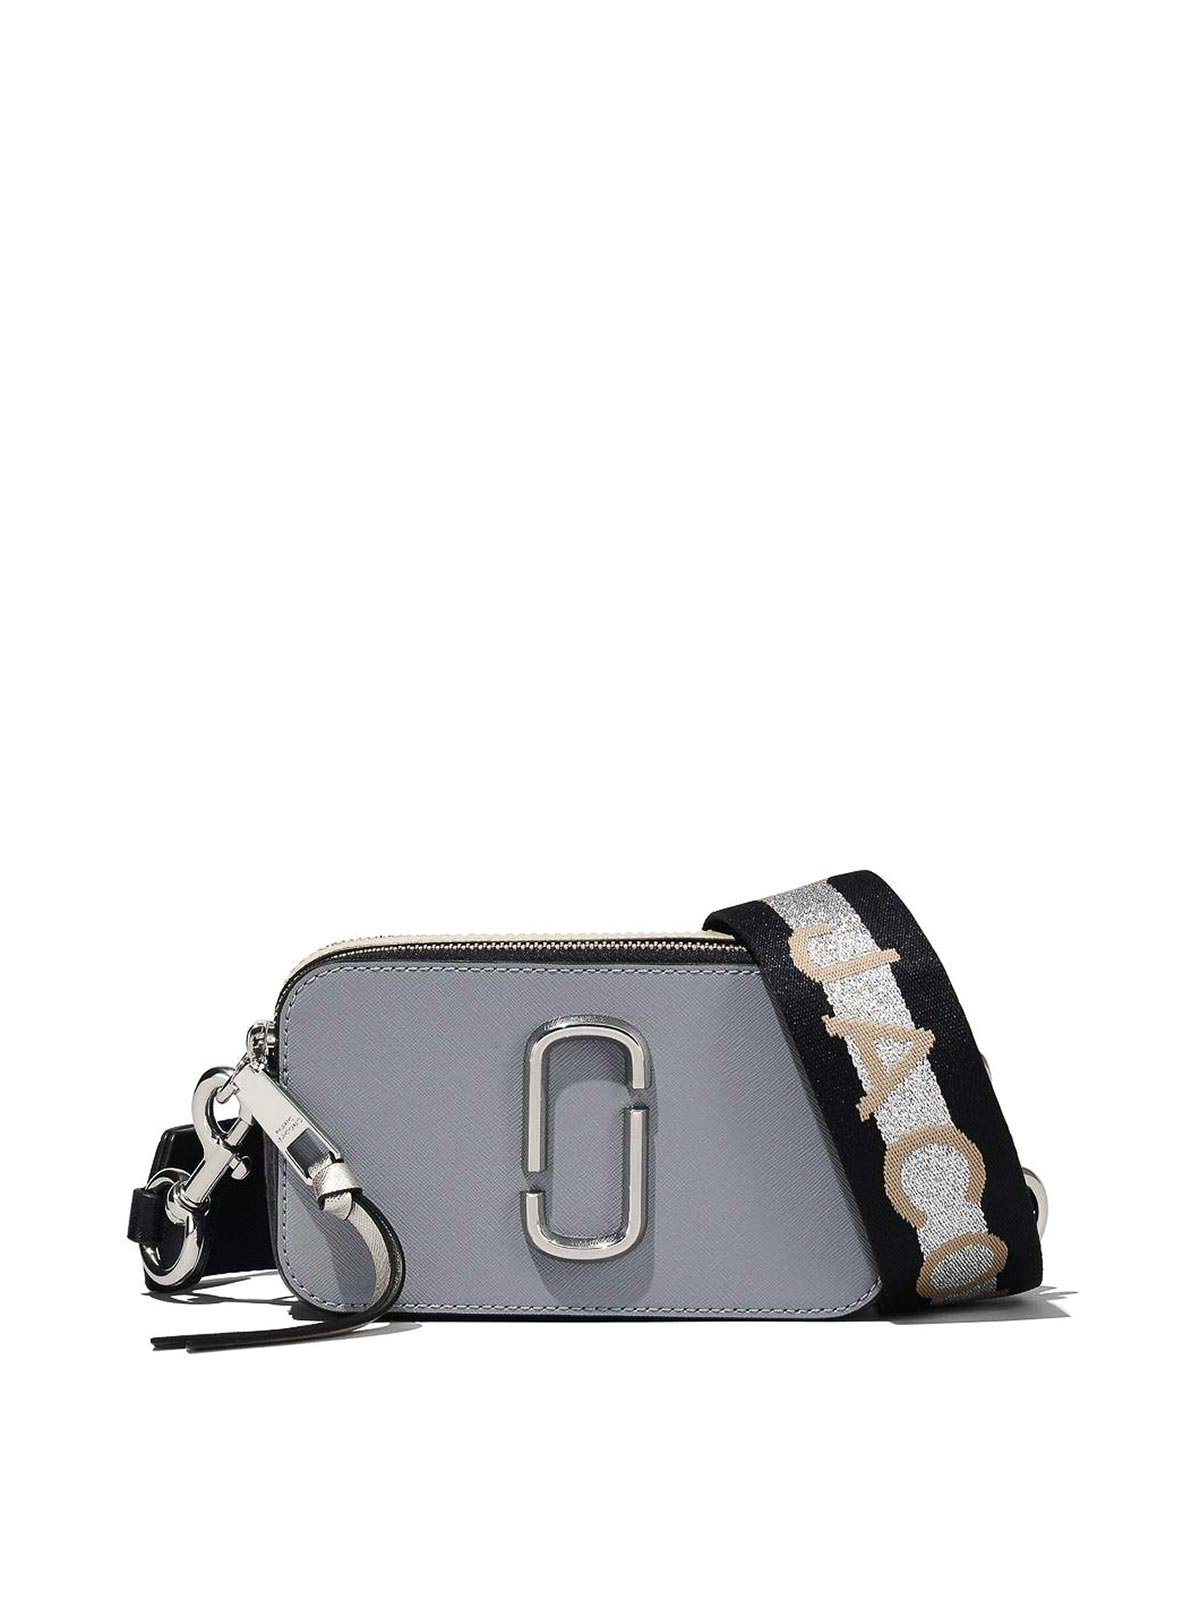 Marc Jacobs Snapshot Leather Crossbody Bag In Black